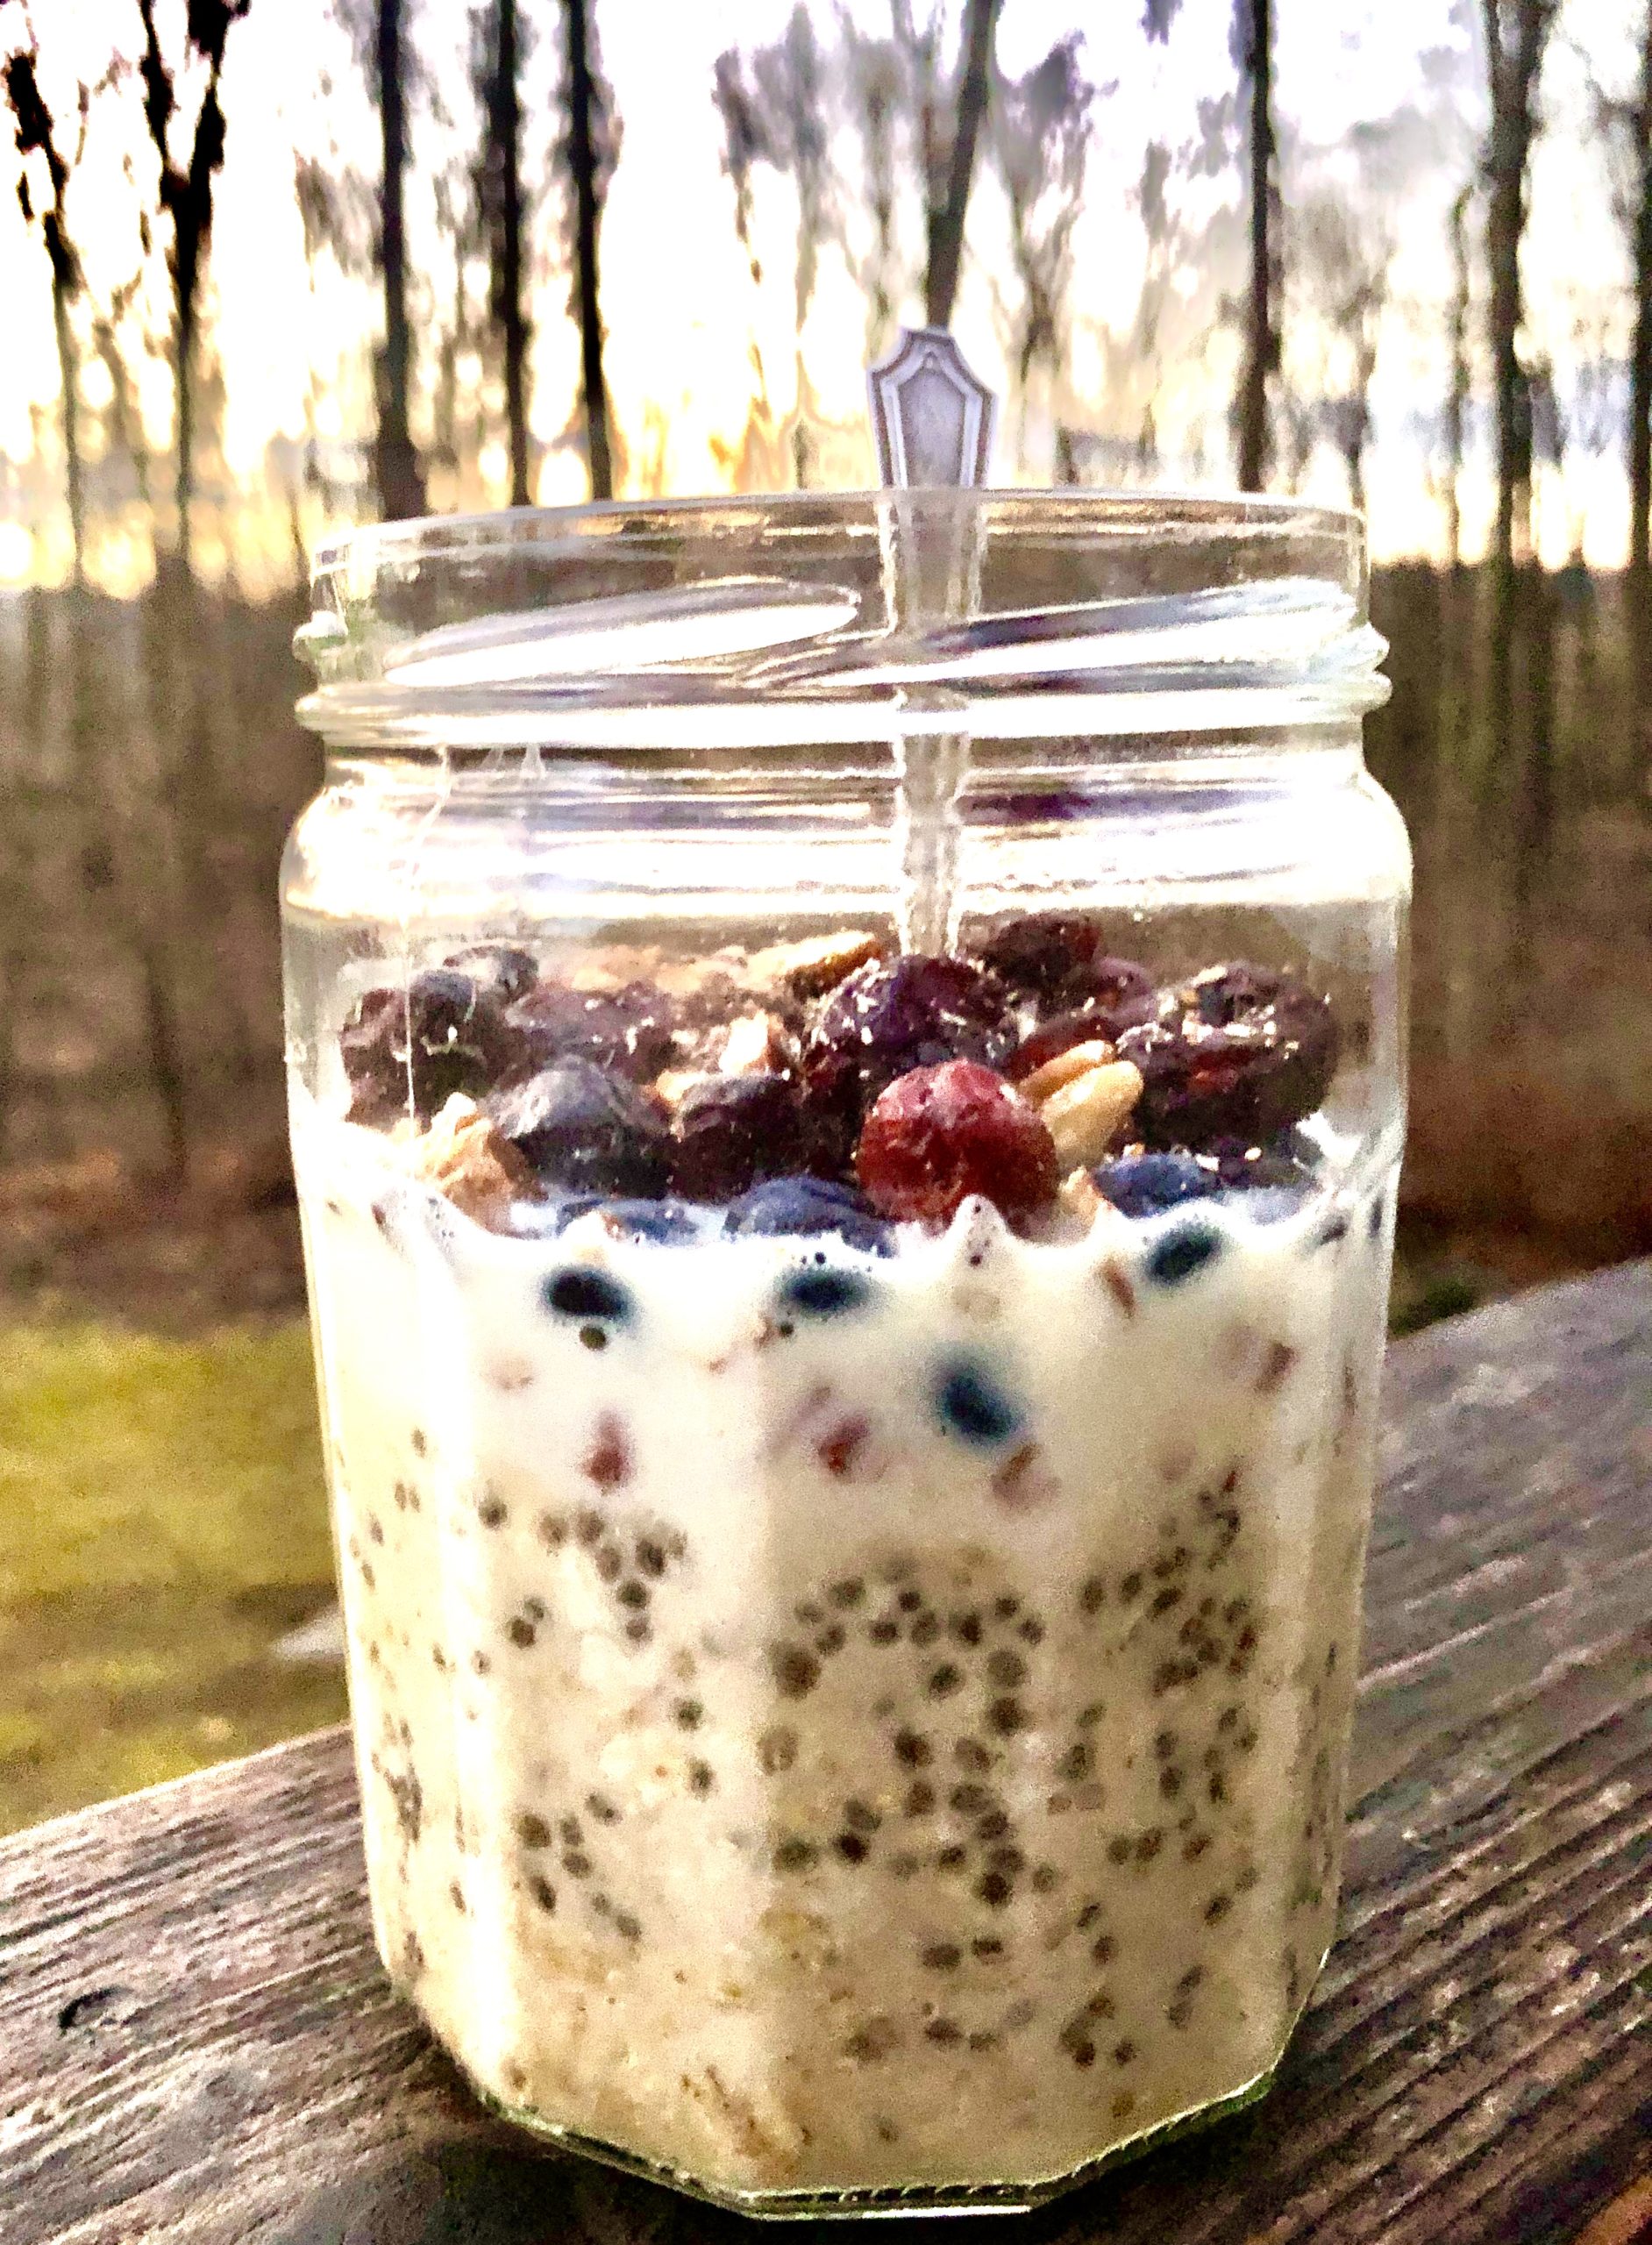 https://www.copperhouseevents.com/wp-content/uploads/Overnight-oatmeal2-scaled.jpg